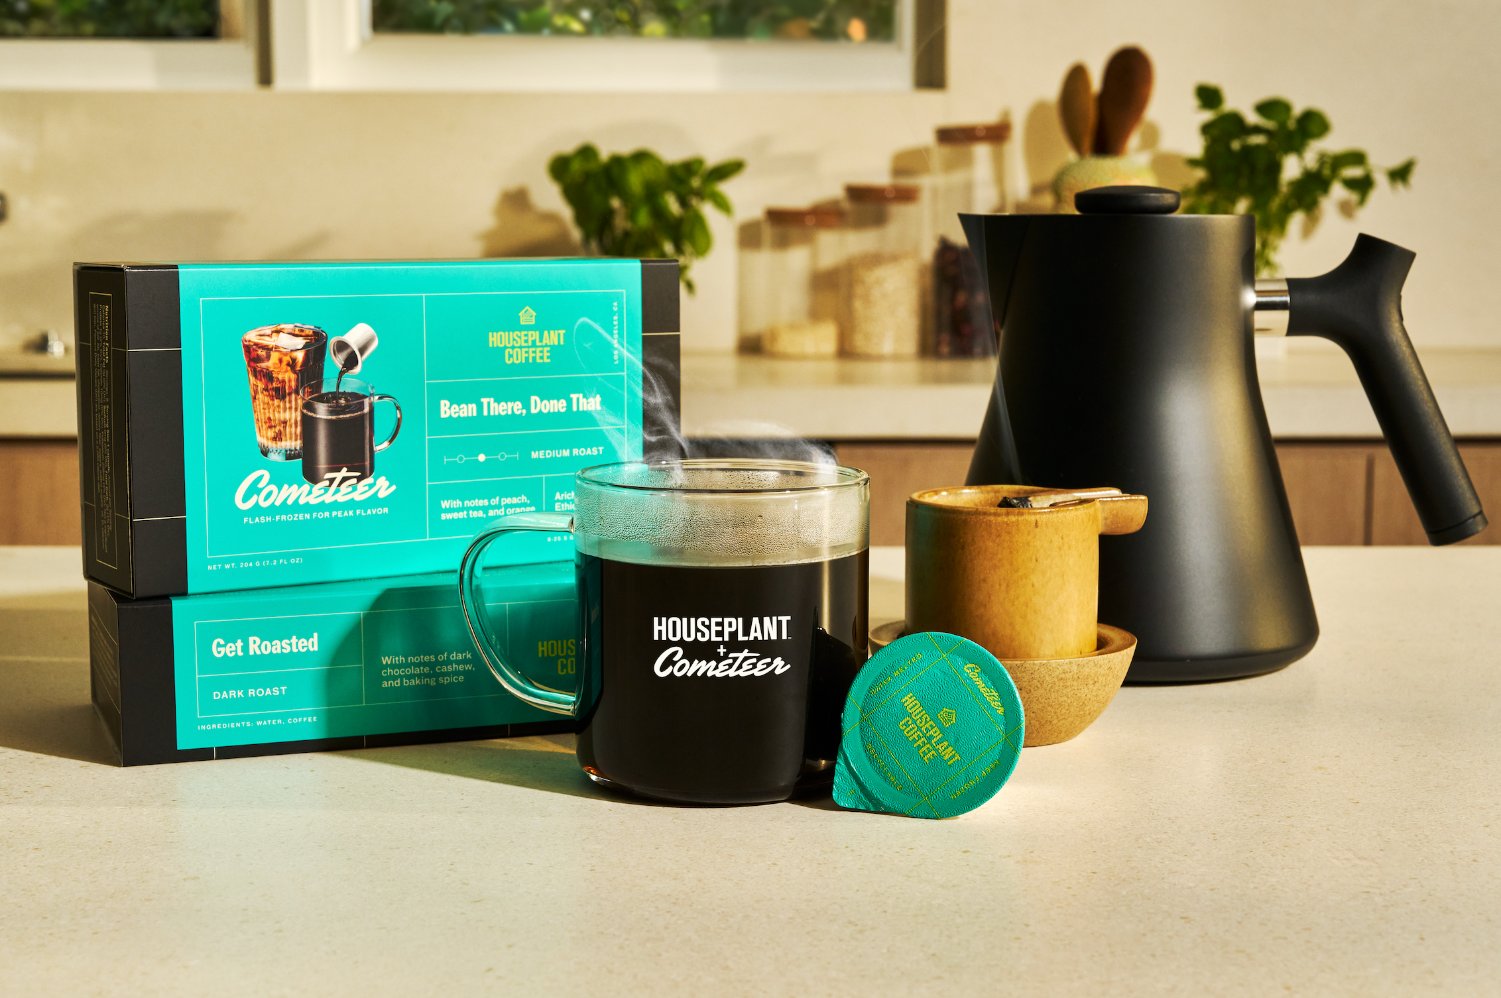 Seth Rogen’s Houseplant Partners With Cometeer and Enters the Coffee World